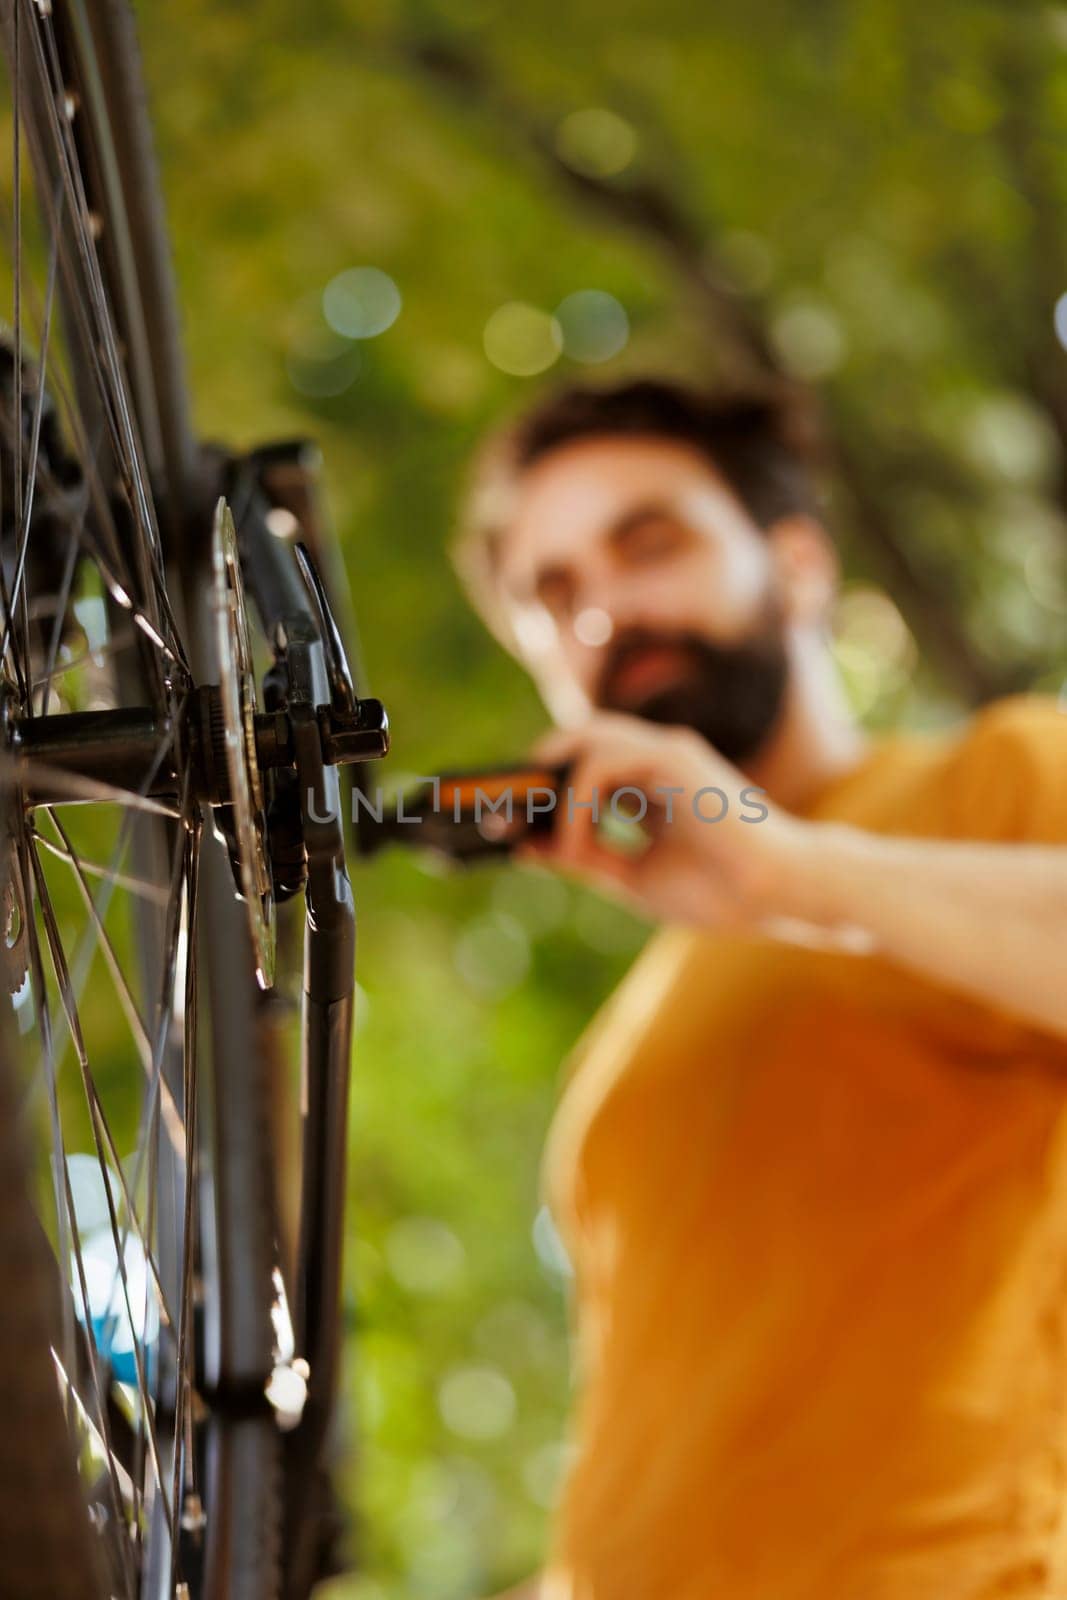 Image showing close-up view of bike rear derailleur and cogset being repaired and adjusted outside for leisure cycling. Detailed shot of young male cyclist checking tire as annual bike maintenance routine.